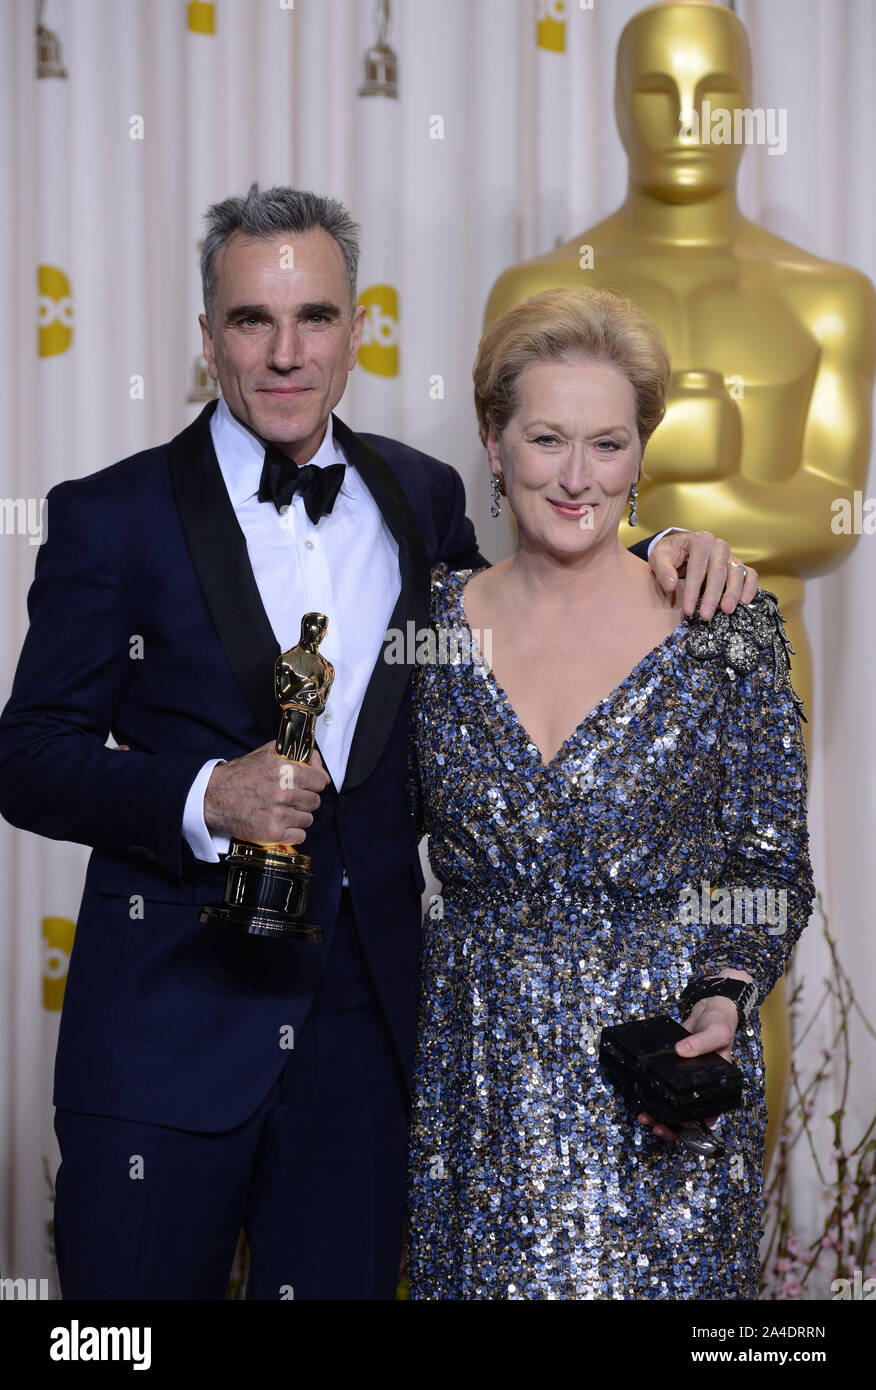 Photo Must Be Credited ©Karwai Tang/Alpha Press 076909 24/02/2013 Daniel Day Lewis wins Best Actor for Lincoln with Meryl Streep at The 85th Academy Awards Oscars 2013 Pressroom held at The Dolby Theatre Hollywood Blvd Los Angeles California Stock Photo